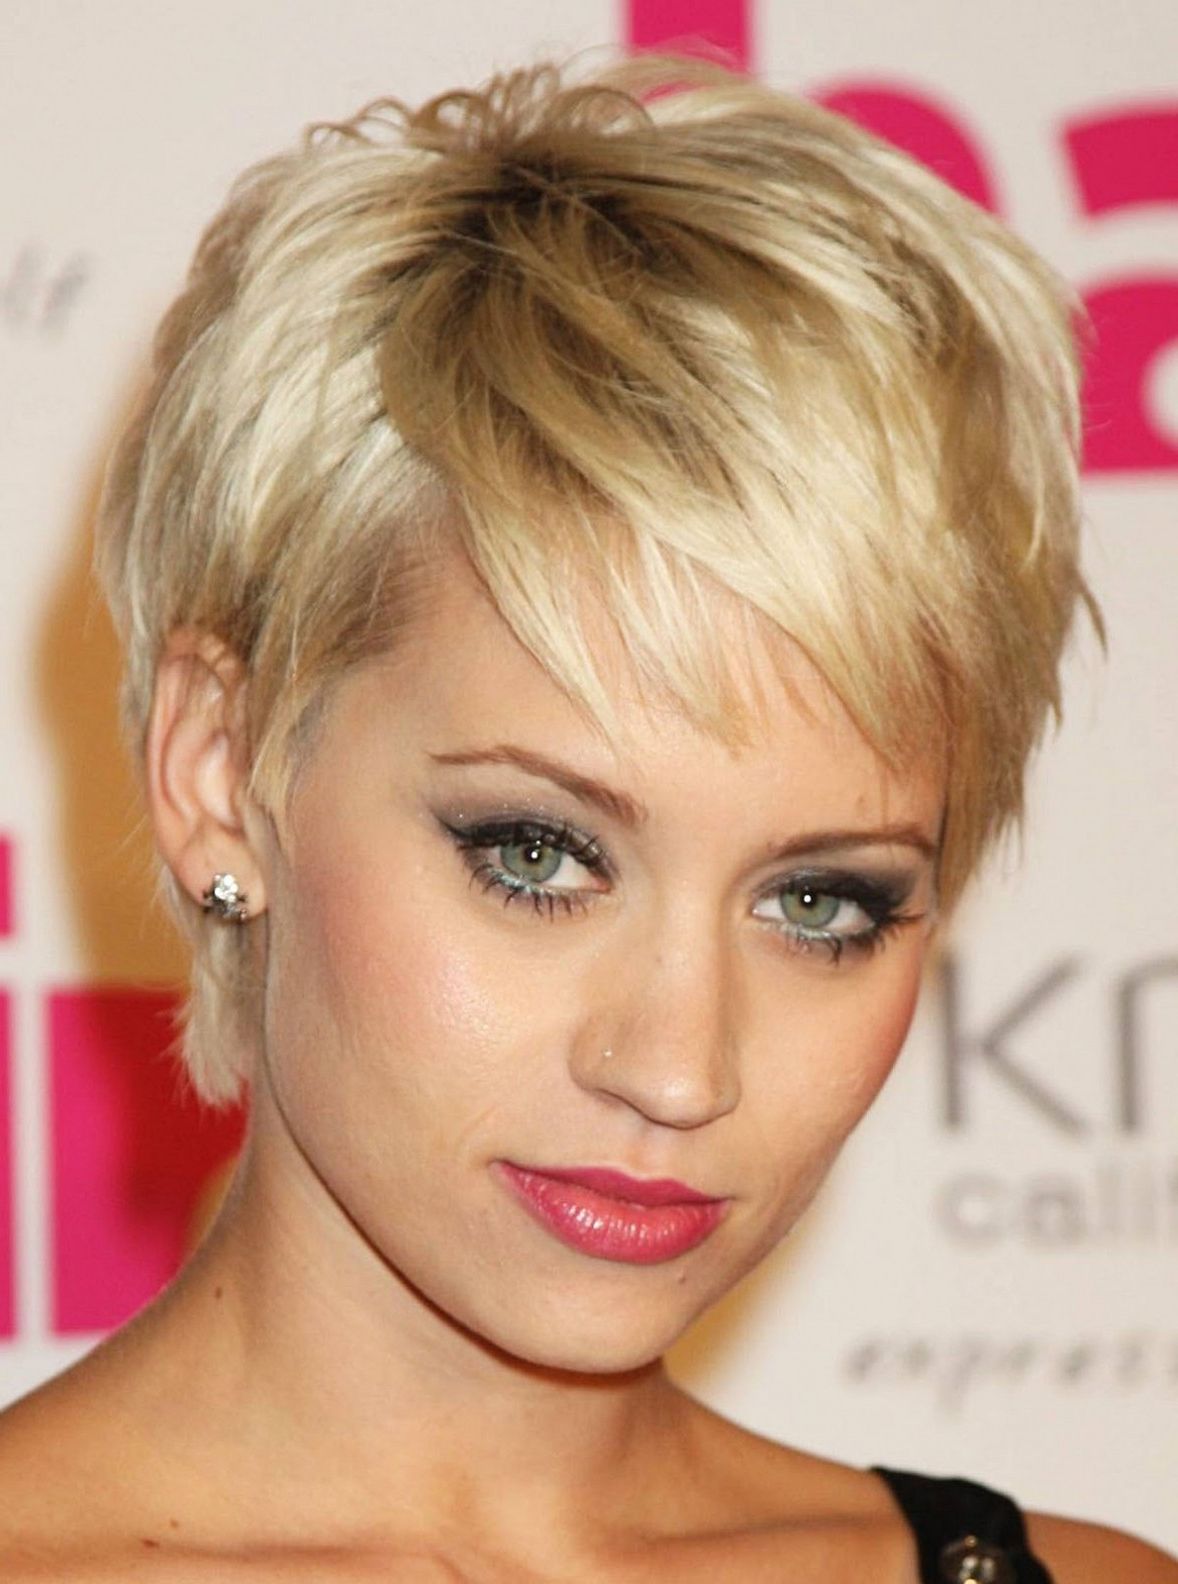 Short Hairstyles To Make You Look Younger Unique Hairstyles Top 5 Throughout Short Hairstyles That Make You Look Younger (View 7 of 25)